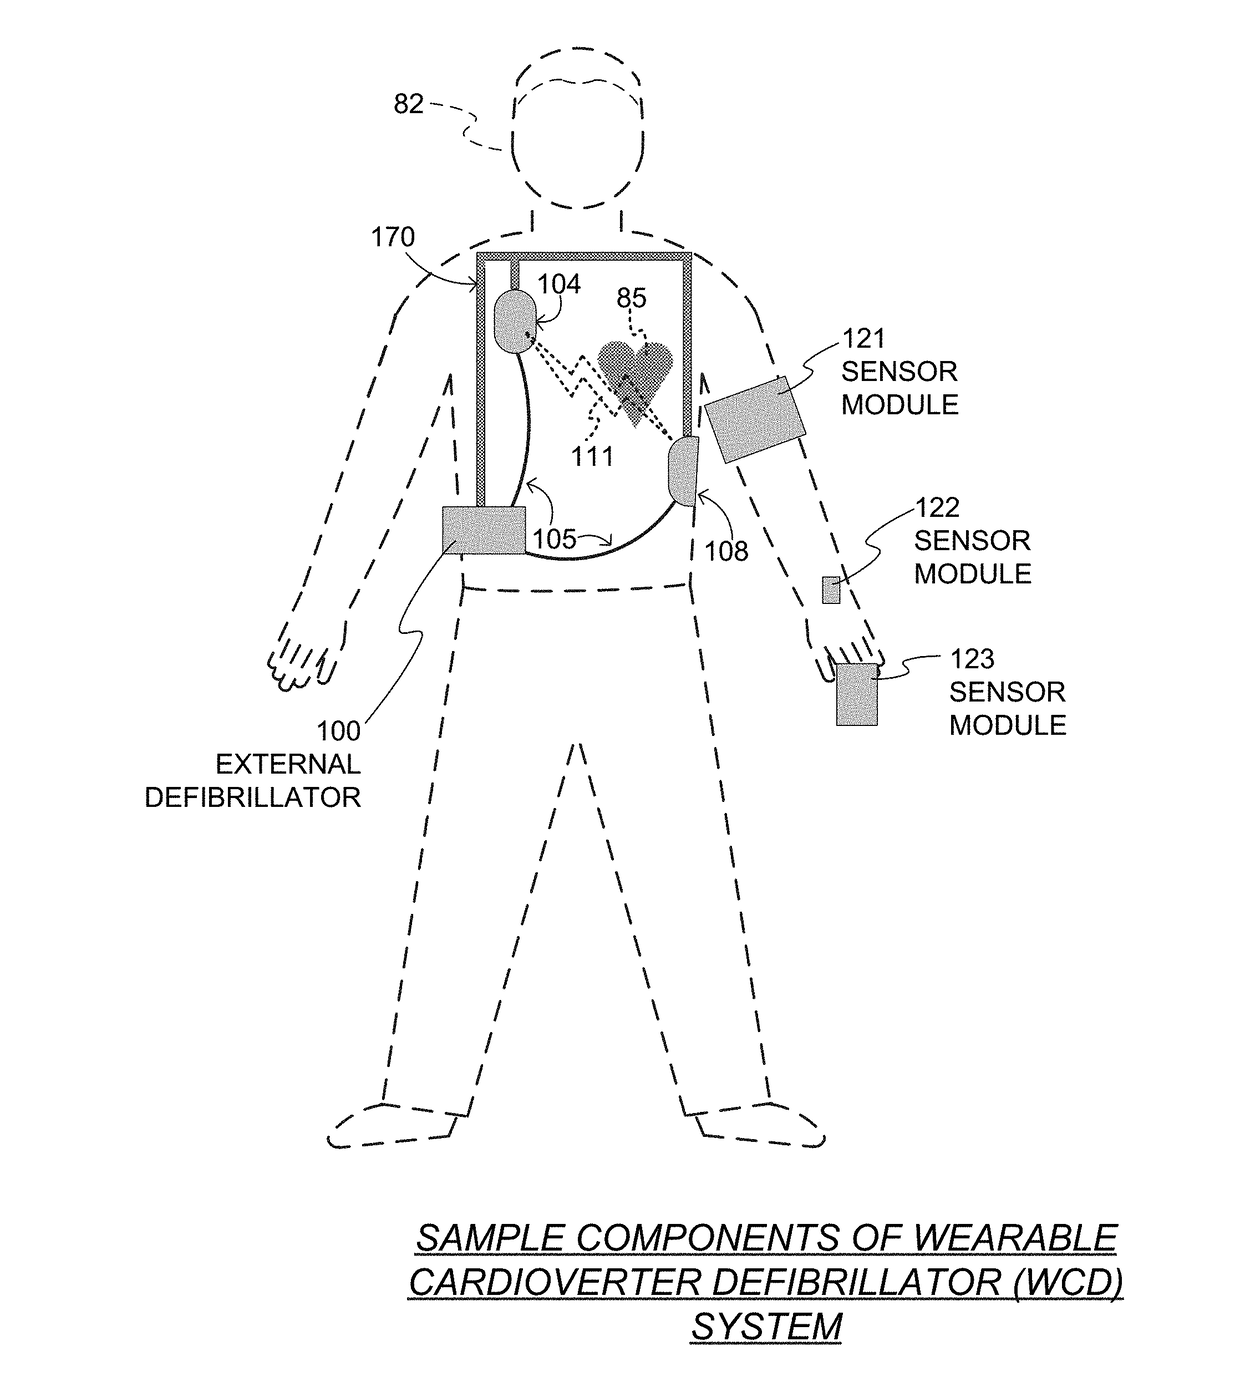 Wearable cardioverter defibrillator (WCD) system using sensor modules with reassurance code for confirmation before shock